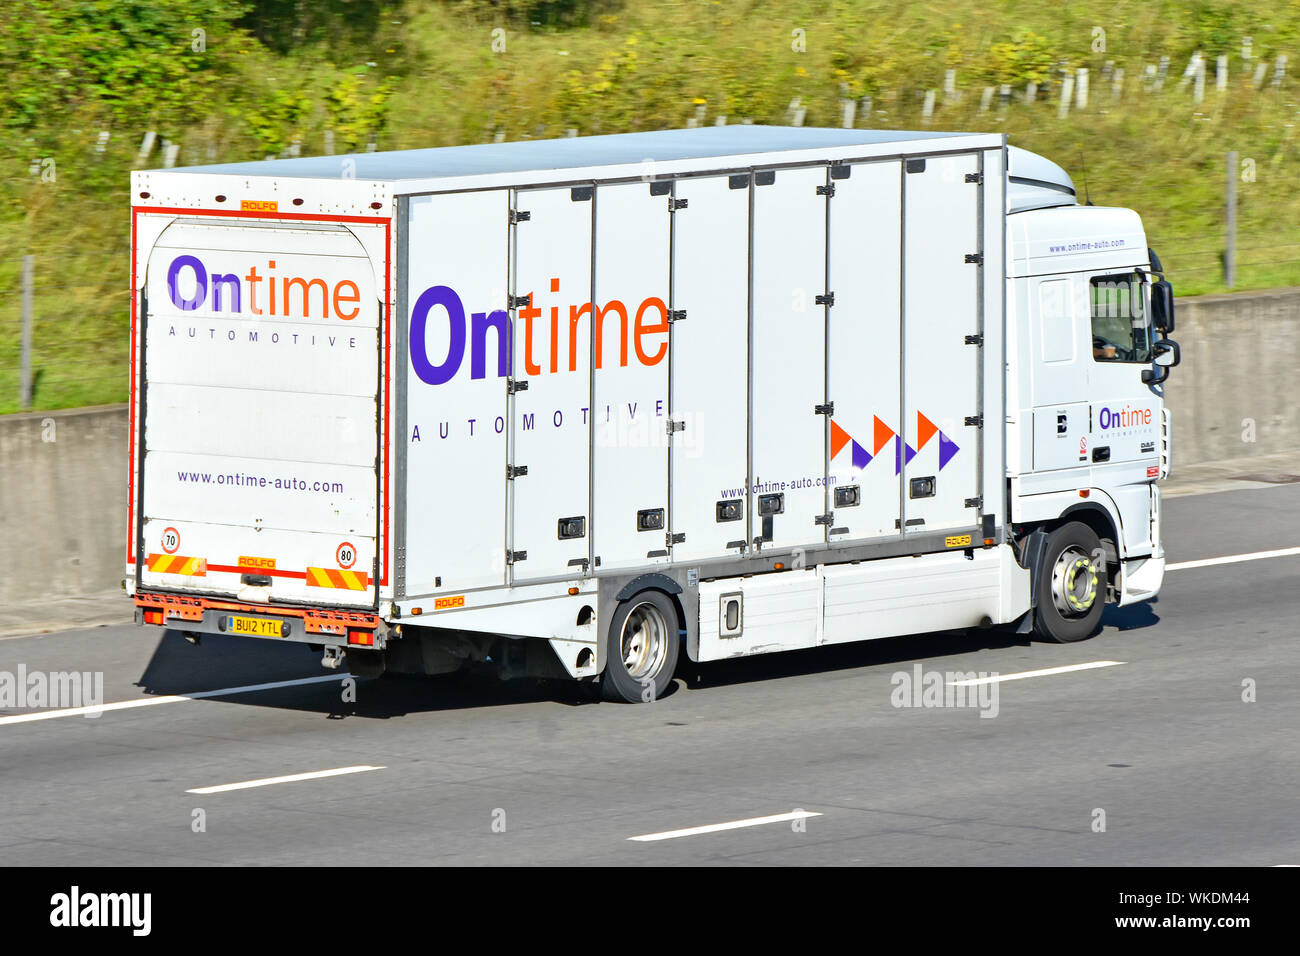 Back & side view of Ontime automotive transport business enclosed car delivery  operator hgv lorry truck with company logo driving along UK motorway Stock Photo